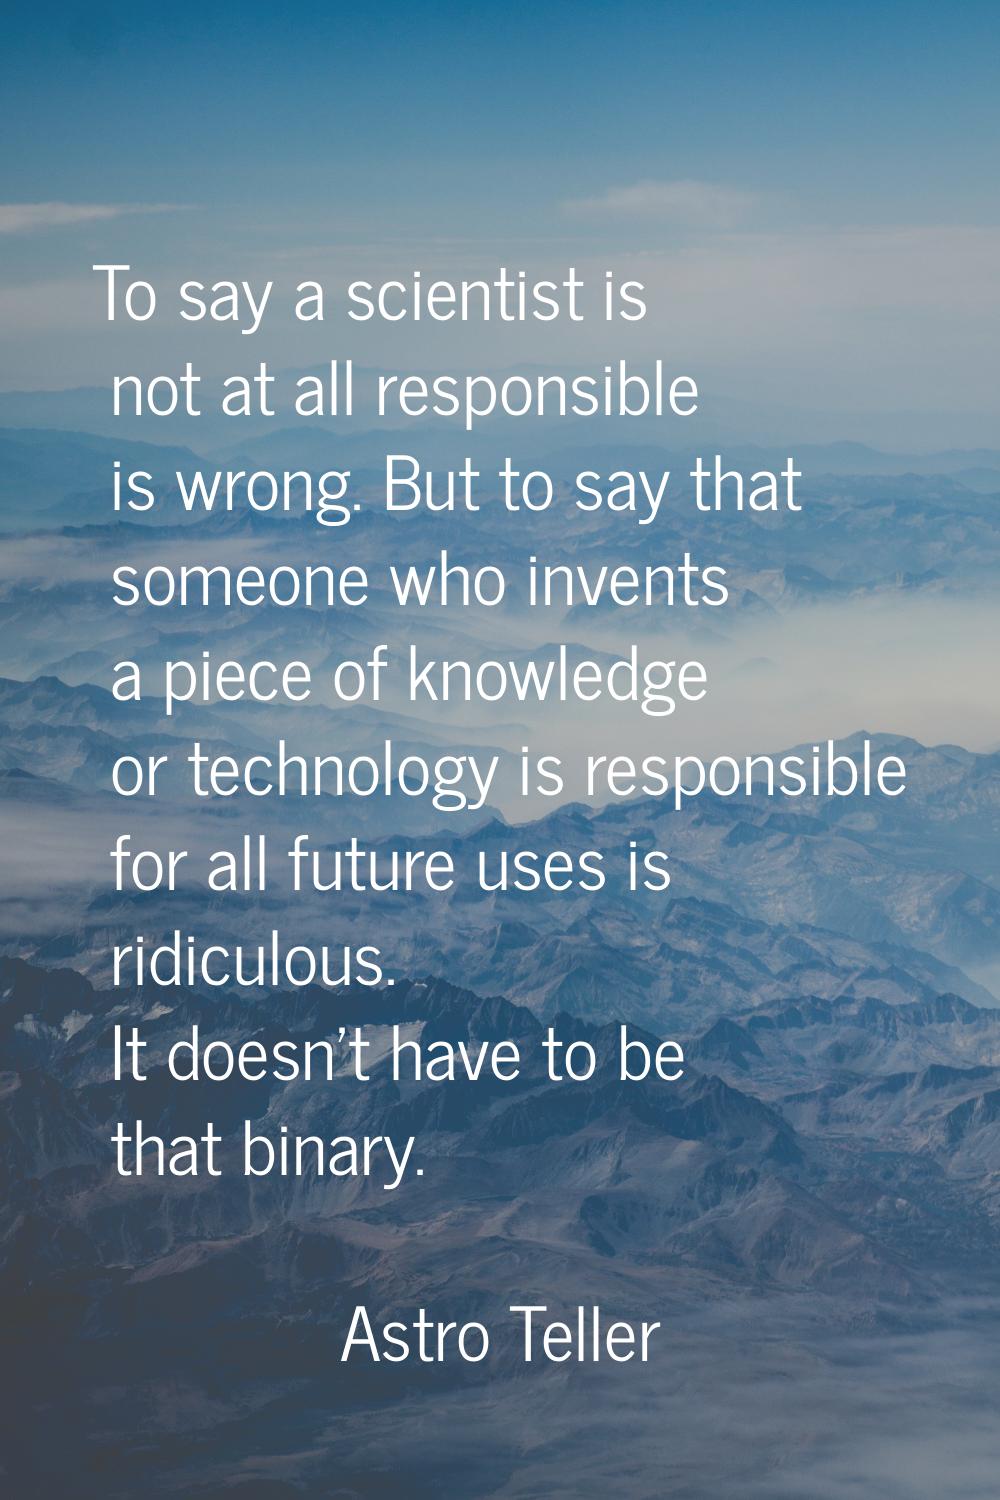 To say a scientist is not at all responsible is wrong. But to say that someone who invents a piece 